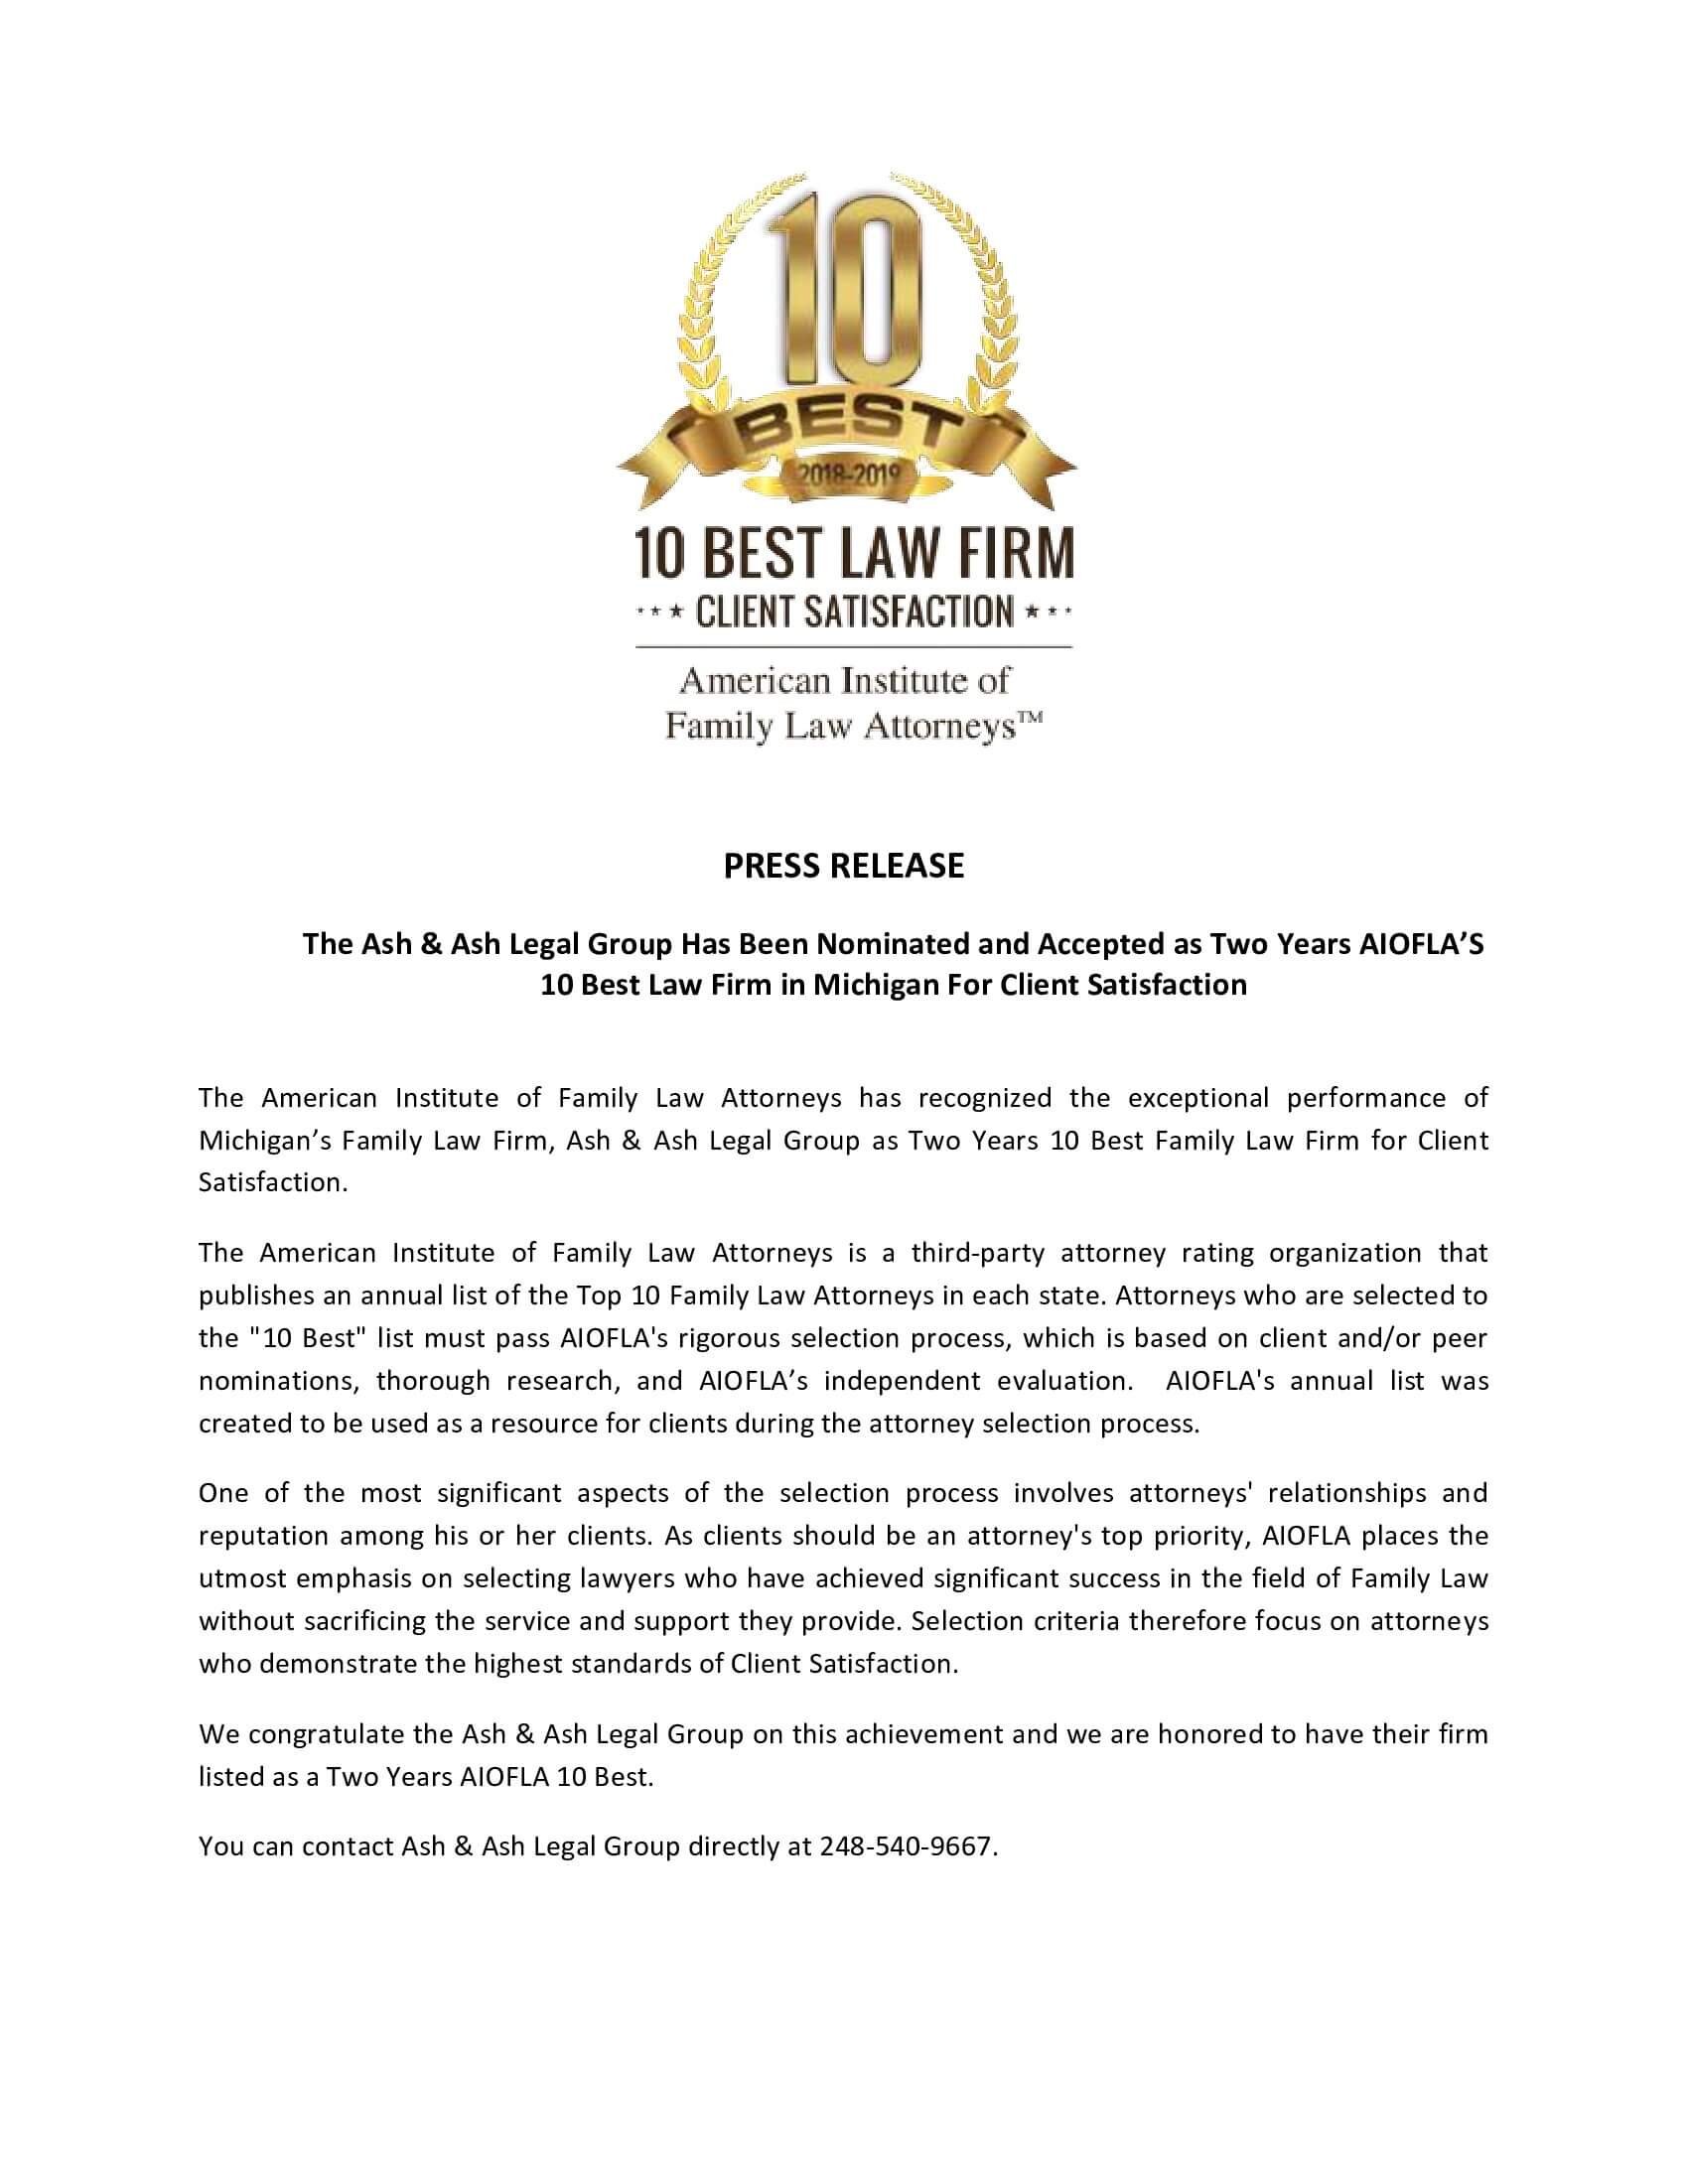 10 Best Law Firm for Client Satisfaction